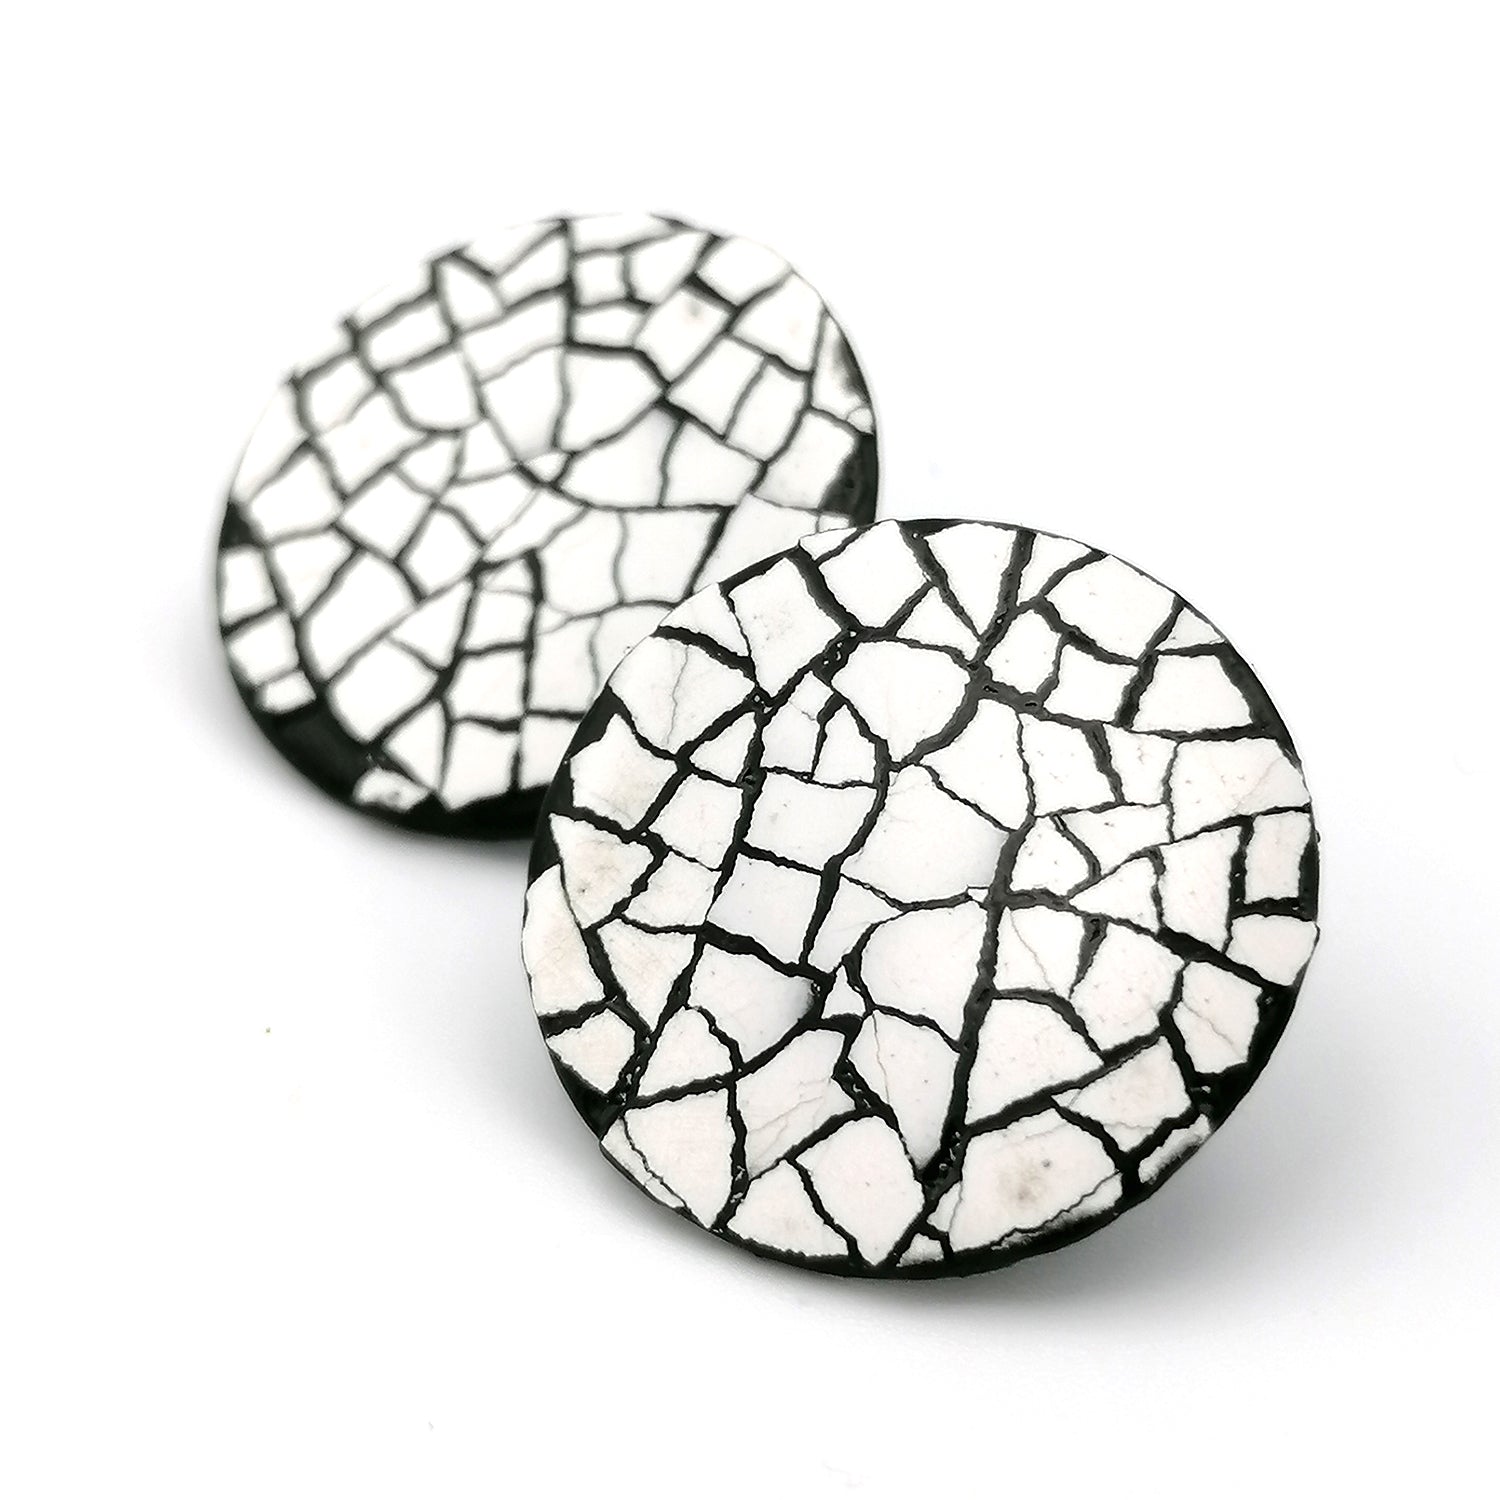 Image shows two midi modern mosaic circle stud earrings. the mosaic is made up of white real eggshell on layers of black lacquer.